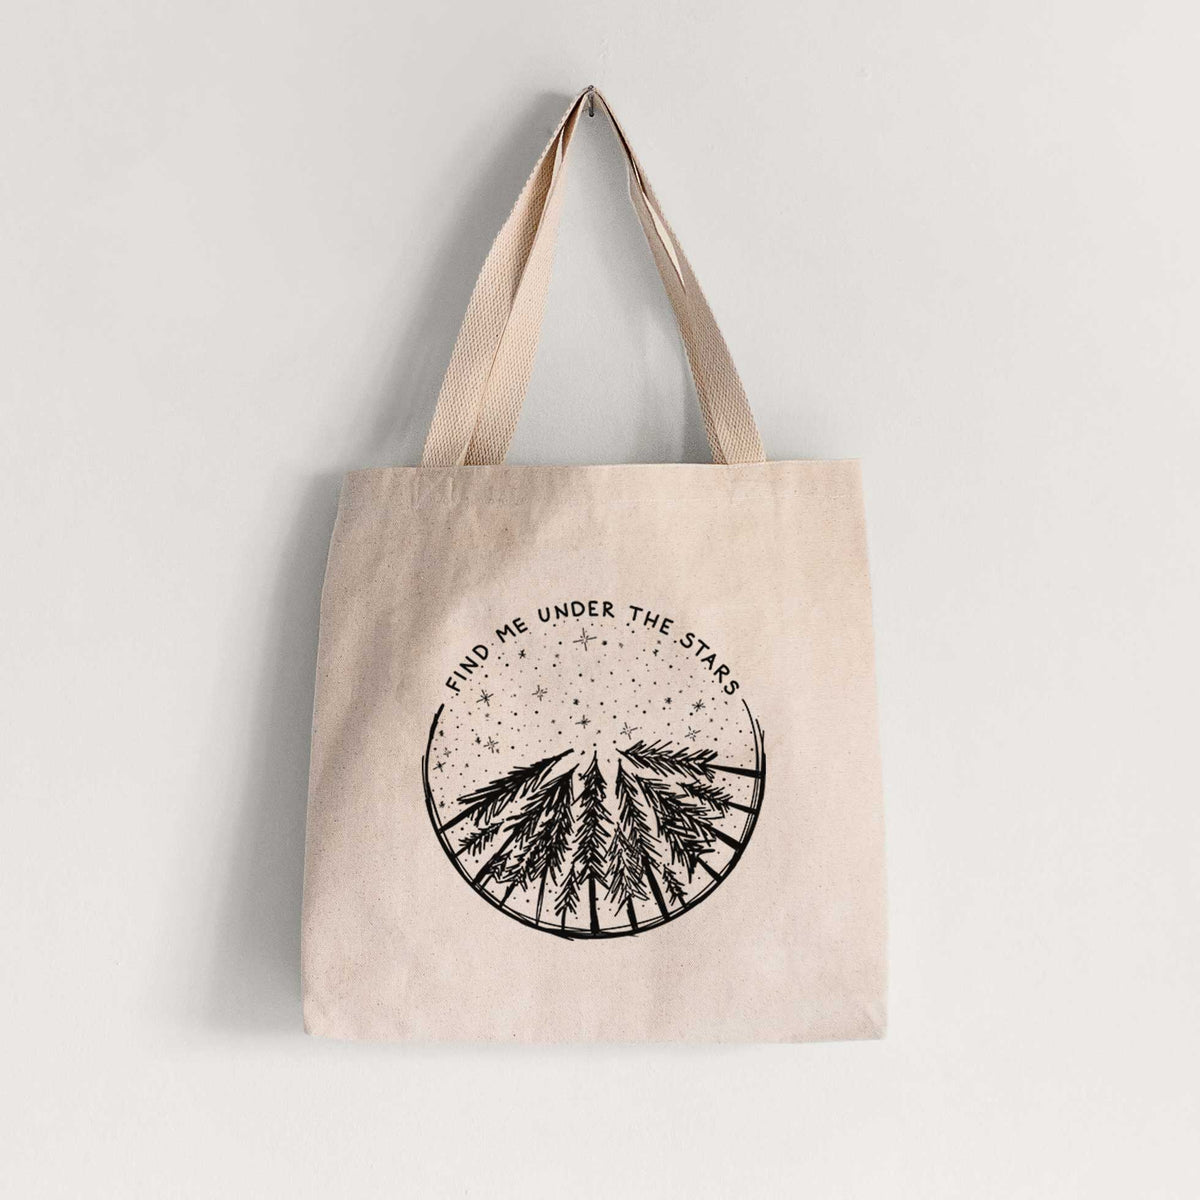 Find Me Under the Stars - Tote Bag